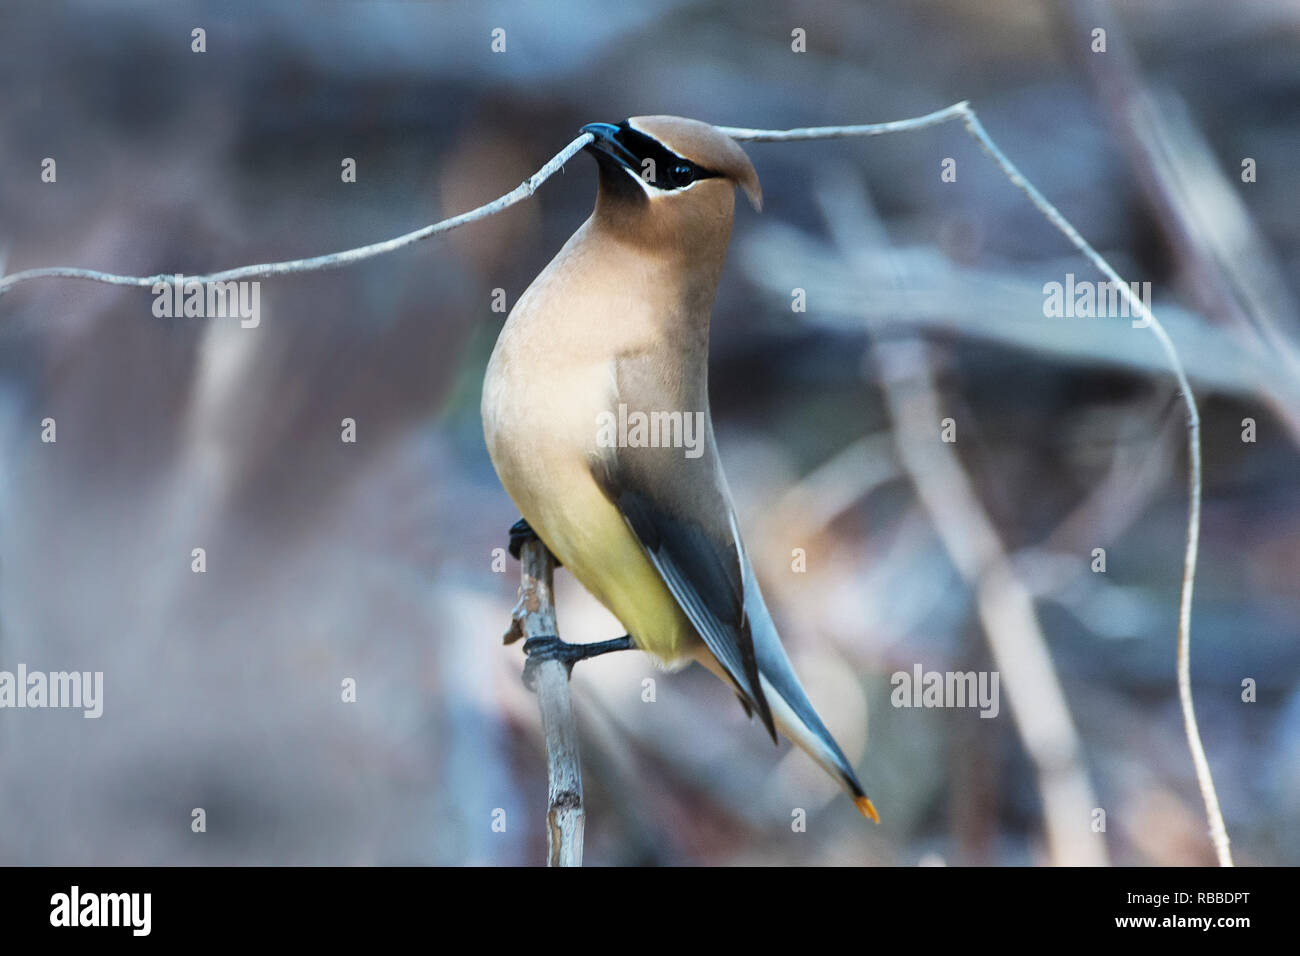 Cedar waxwing with nesting material Stock Photo